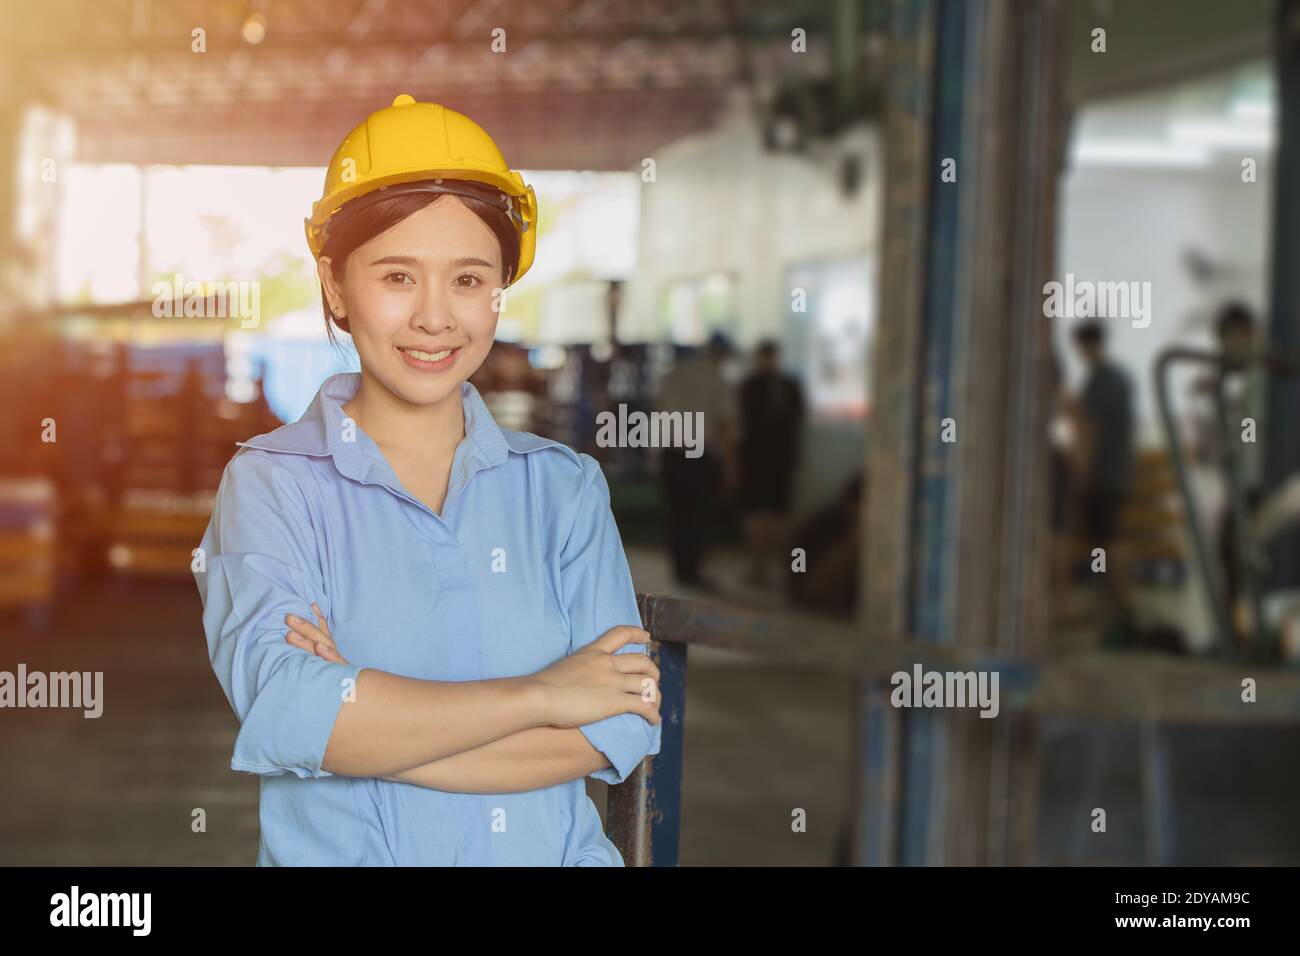 Young Asian smart woman working as foreman head engineer manager at logistic warehouse portrait smiling arms crossed. Stock Photo